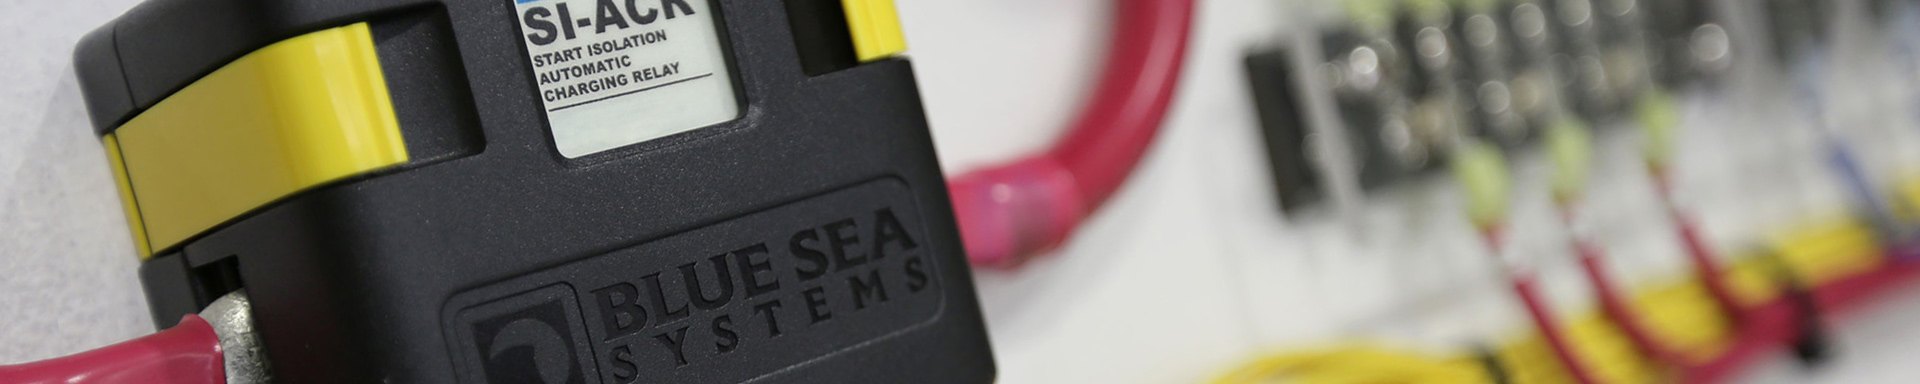 Blue Sea Systems Marine Switches